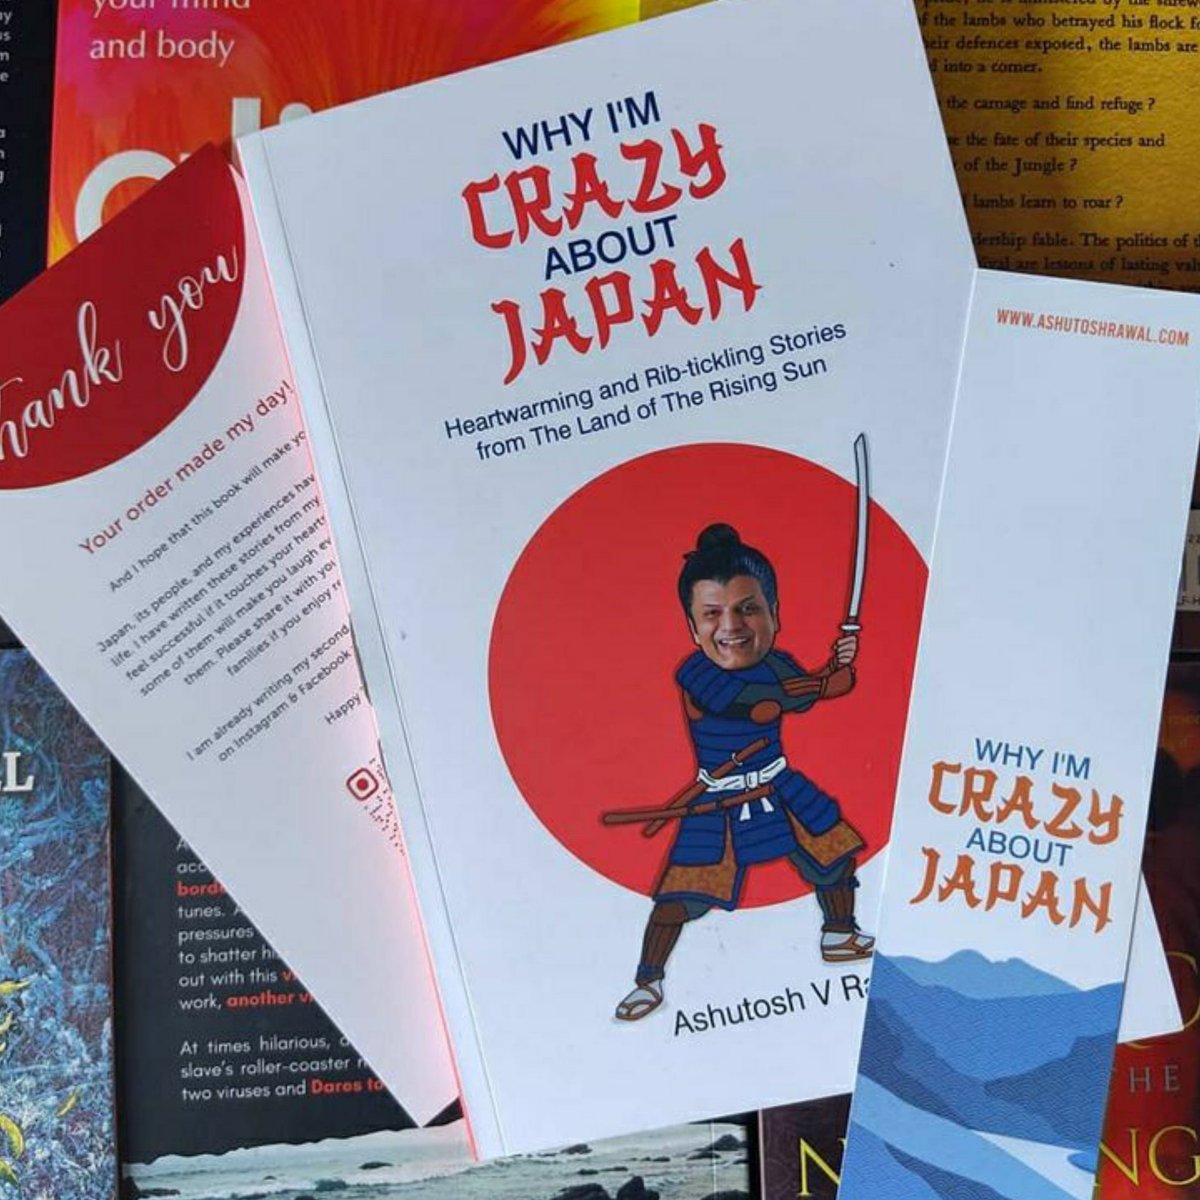 My heartwarming and rib-tickling stories from the land of rising sun. I hope you all will love this book.

To know more
ashutoshrawal.com/product/crazy-…

#travelwriter #travelauthor #indianauthors #indianwriter #japanbook #indianbooks #travelblog  #travel #funnybook #heartwarmingbooks